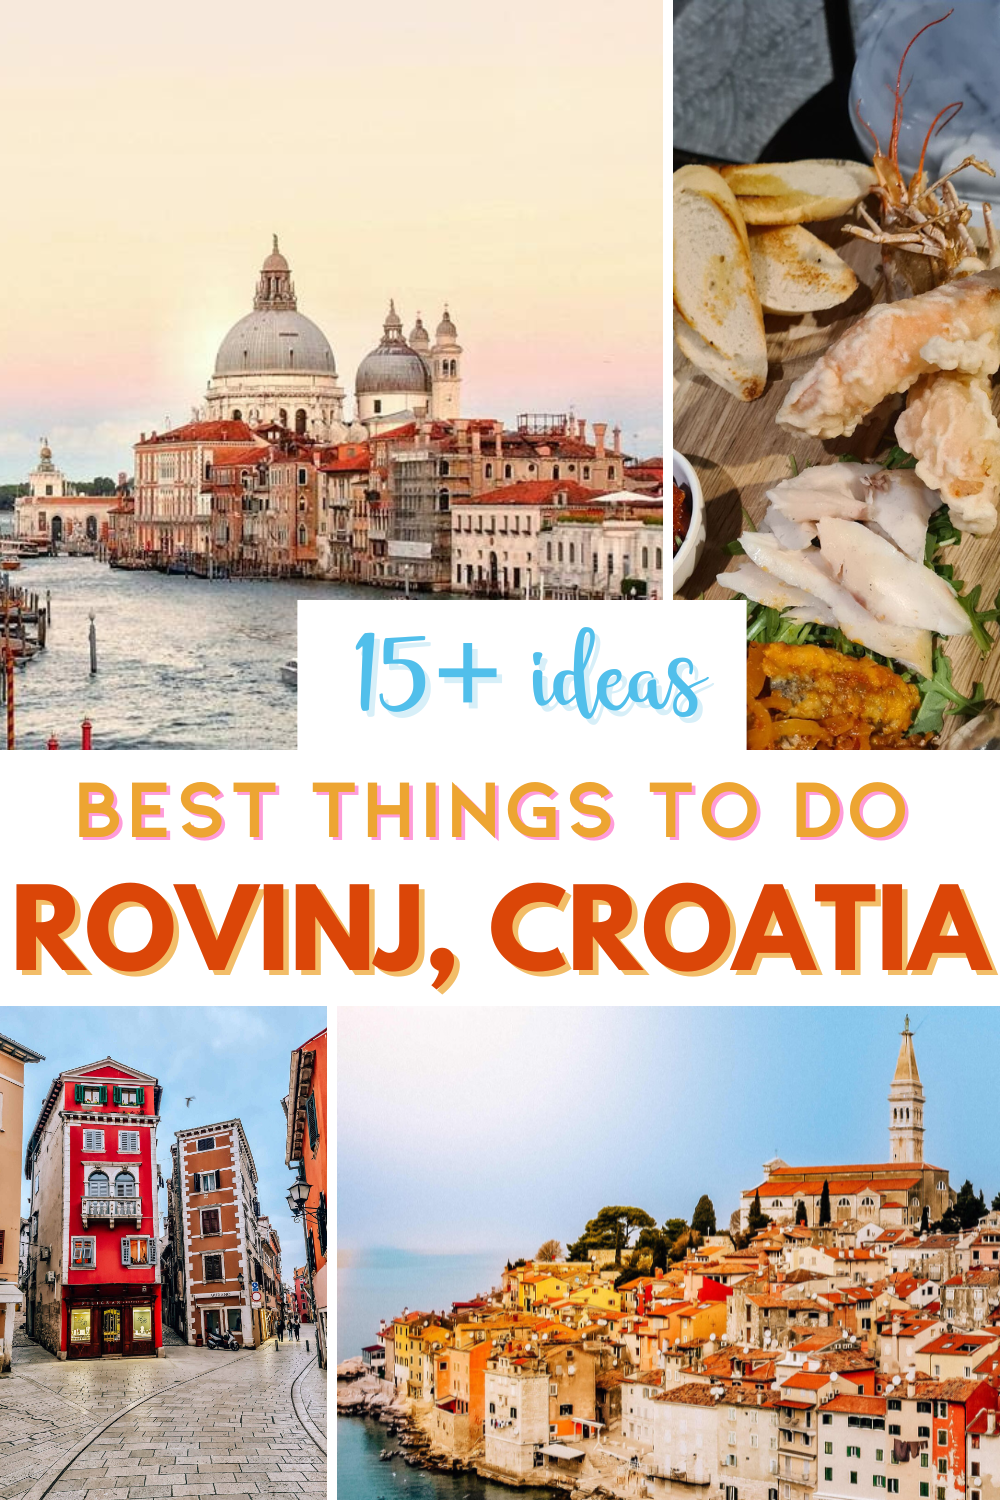 Rovinj is growing in popularity and with stunning beaches, islands to sail to, day trips to Venice and amazing food, these are the top things to do in Rovinj, Croatia to make the most of your trip. | rovinj top 10 things to do | things to do in rovin